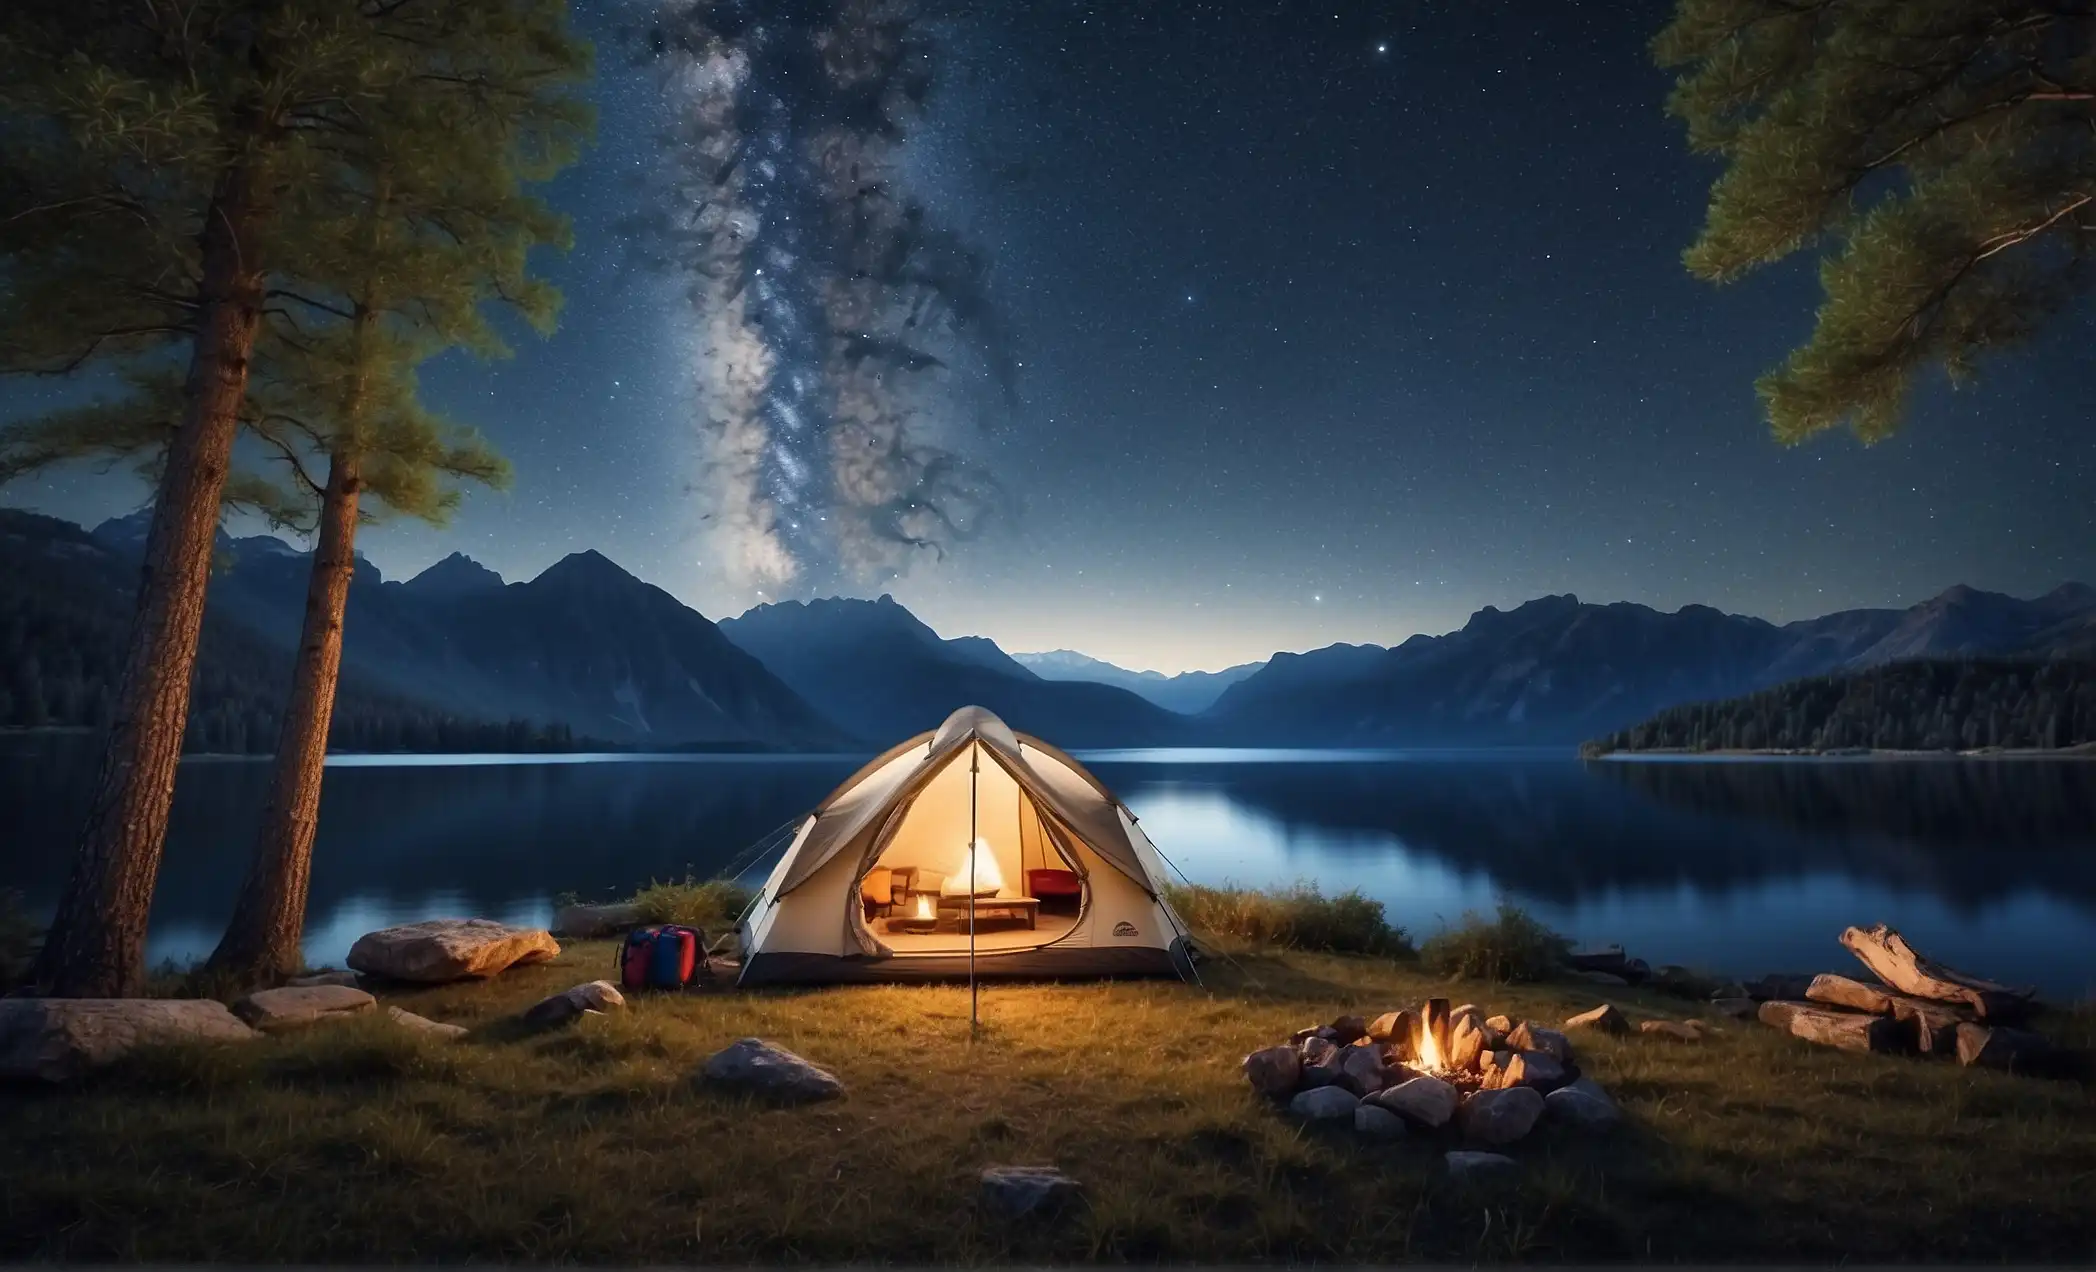 How Safe is Camping in a Tent